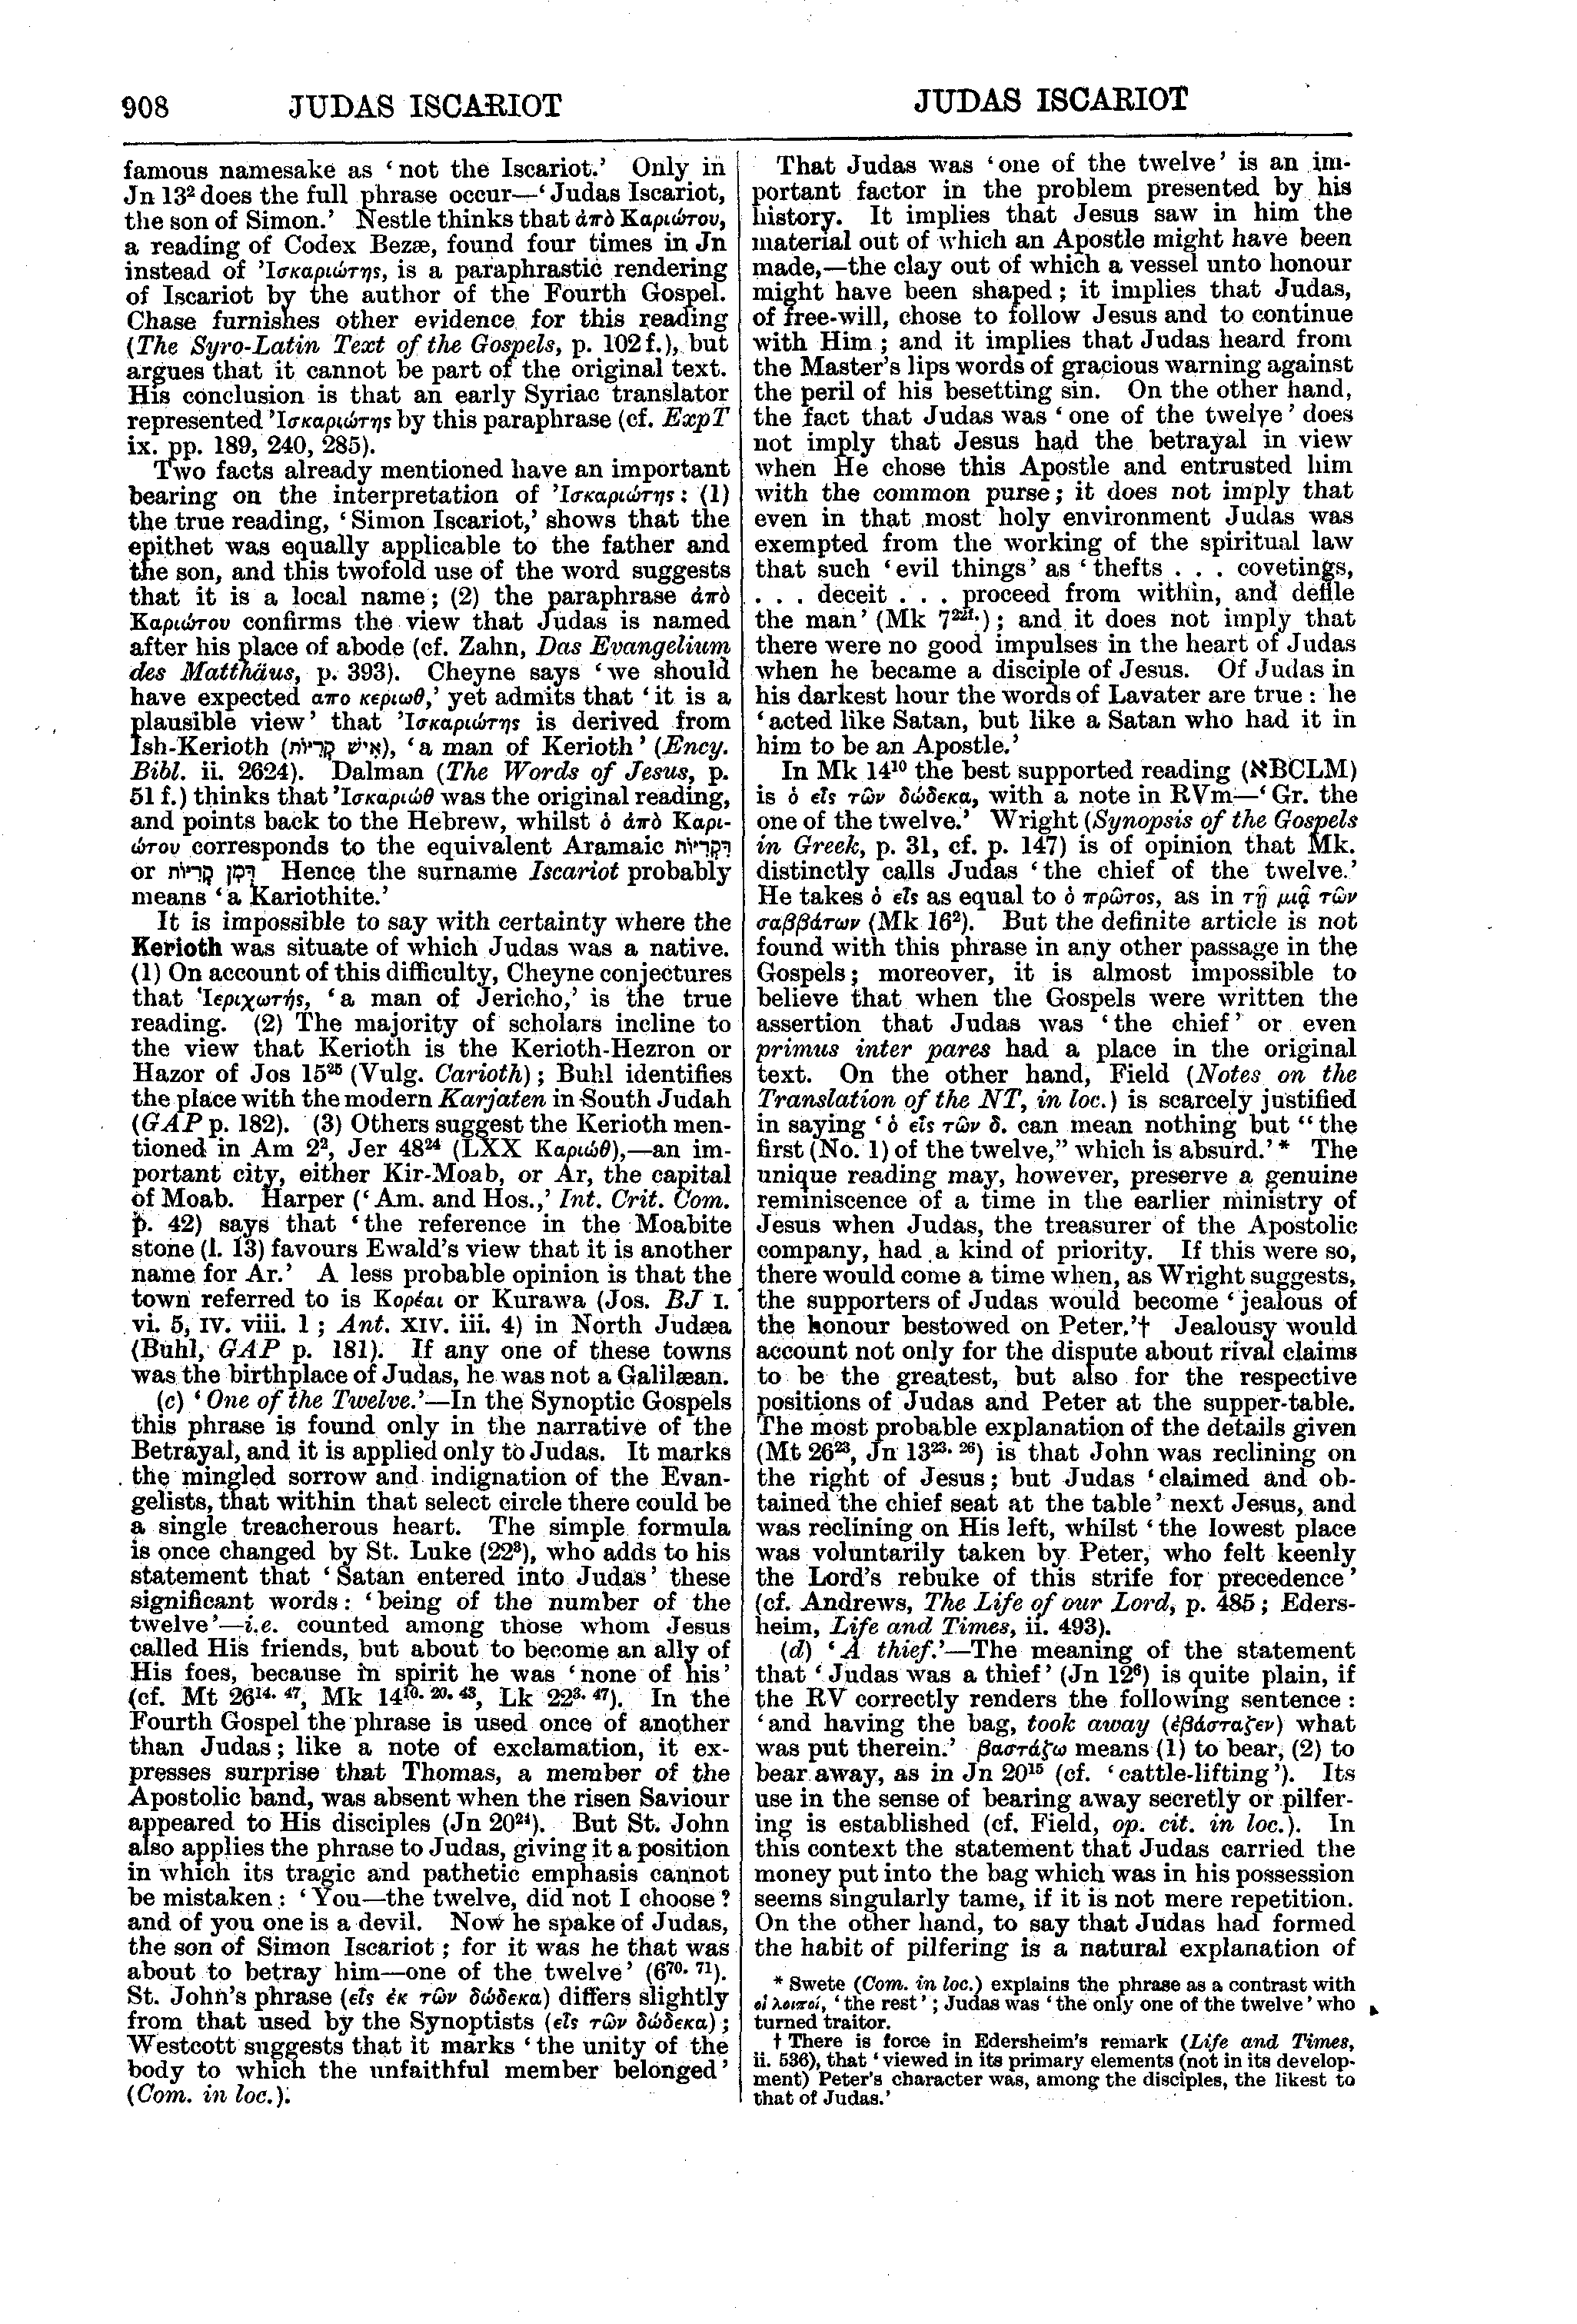 Image of page 908